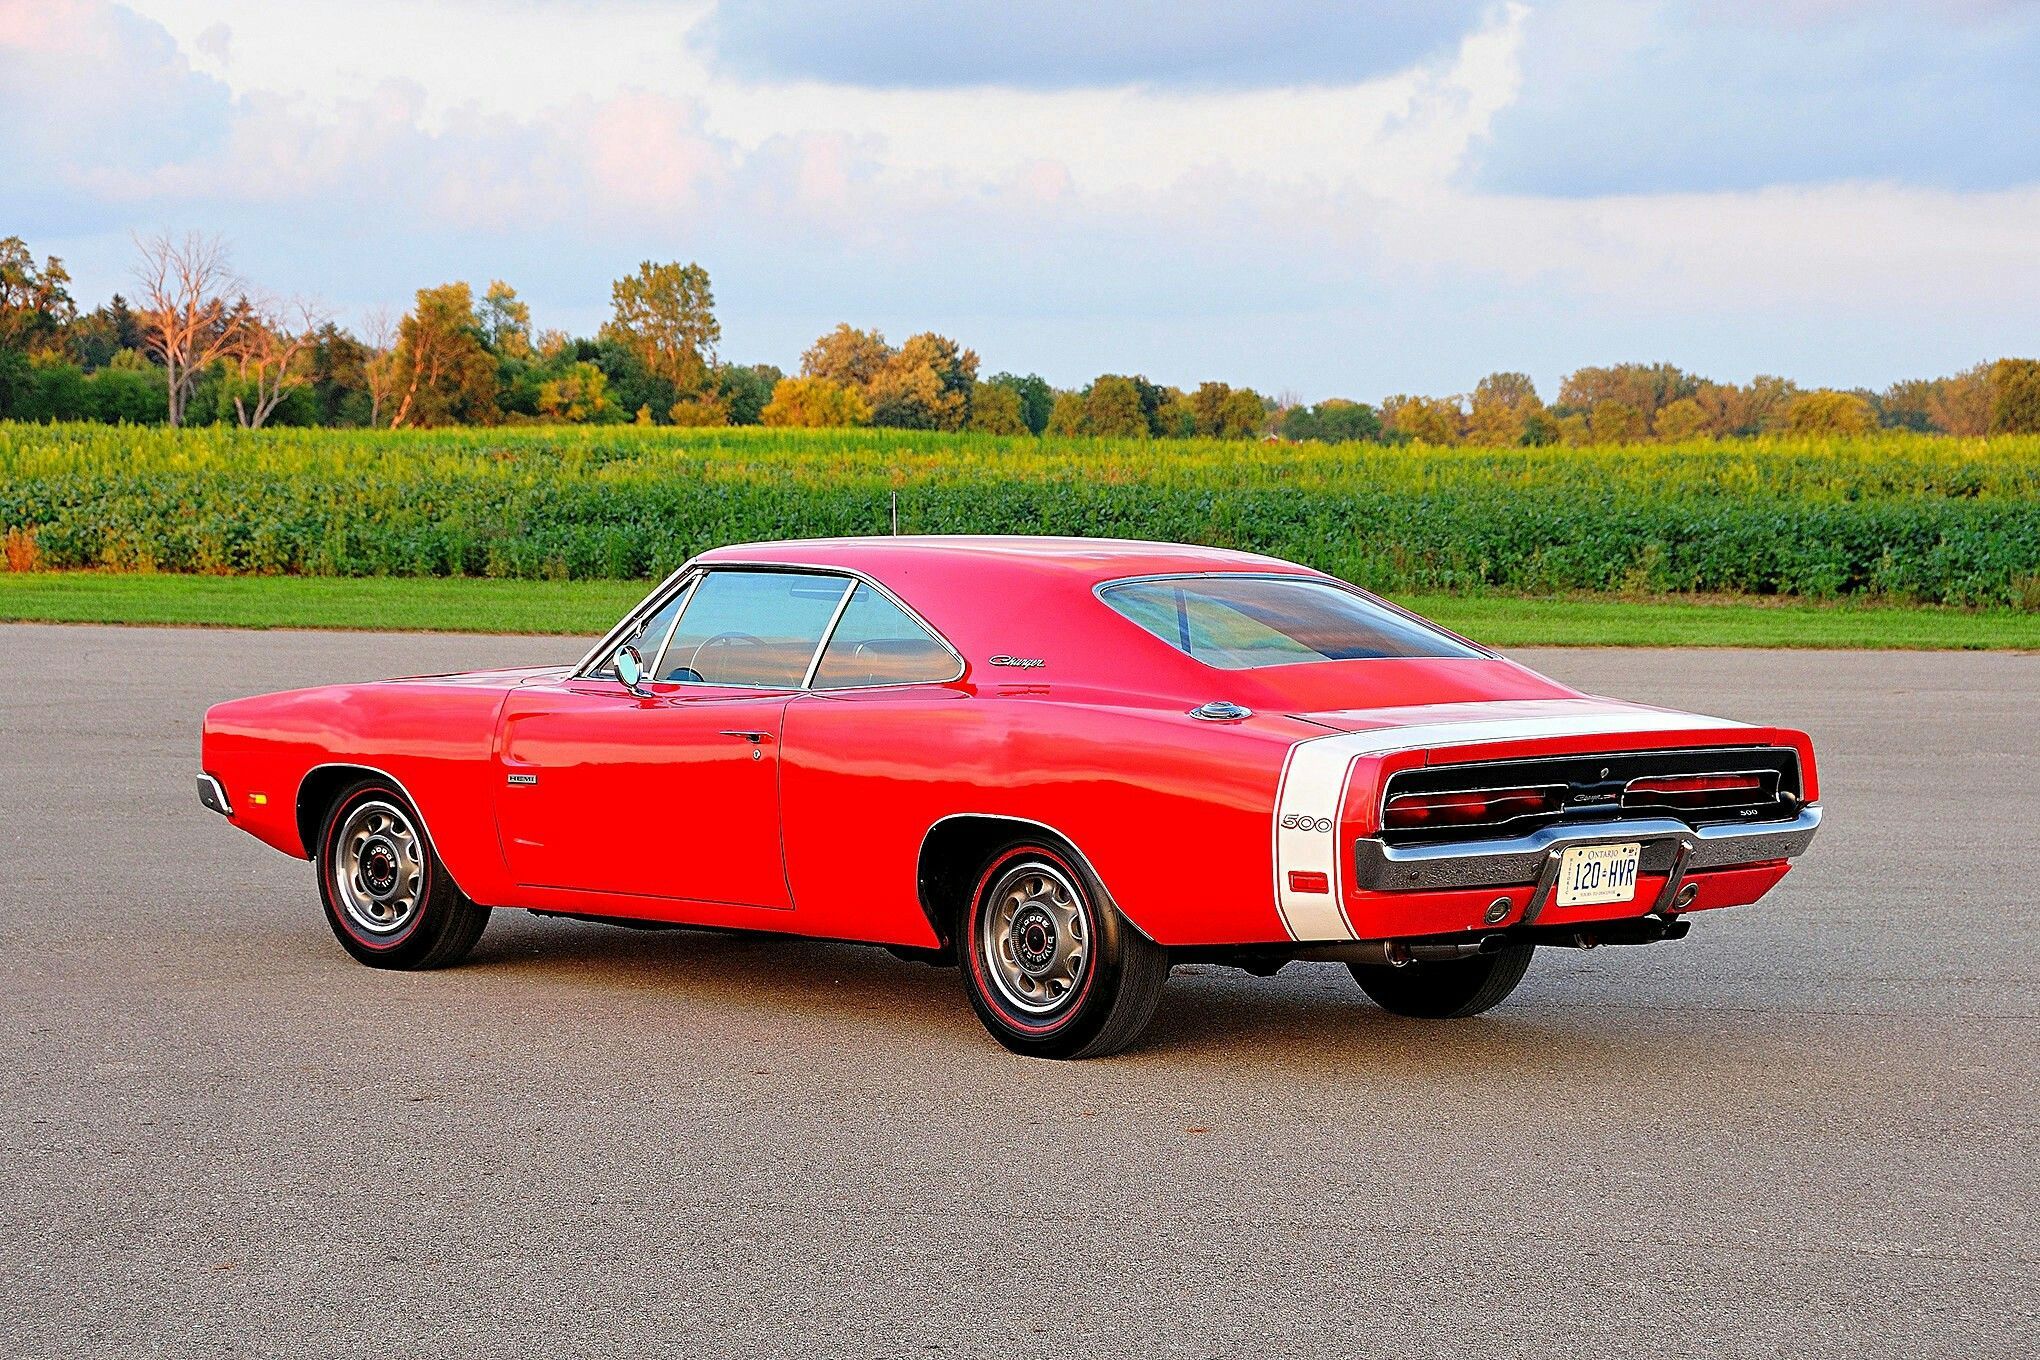 3/4 rear view of a Red 1969 Dodge Charger 500 Hemi on the worn tarmac